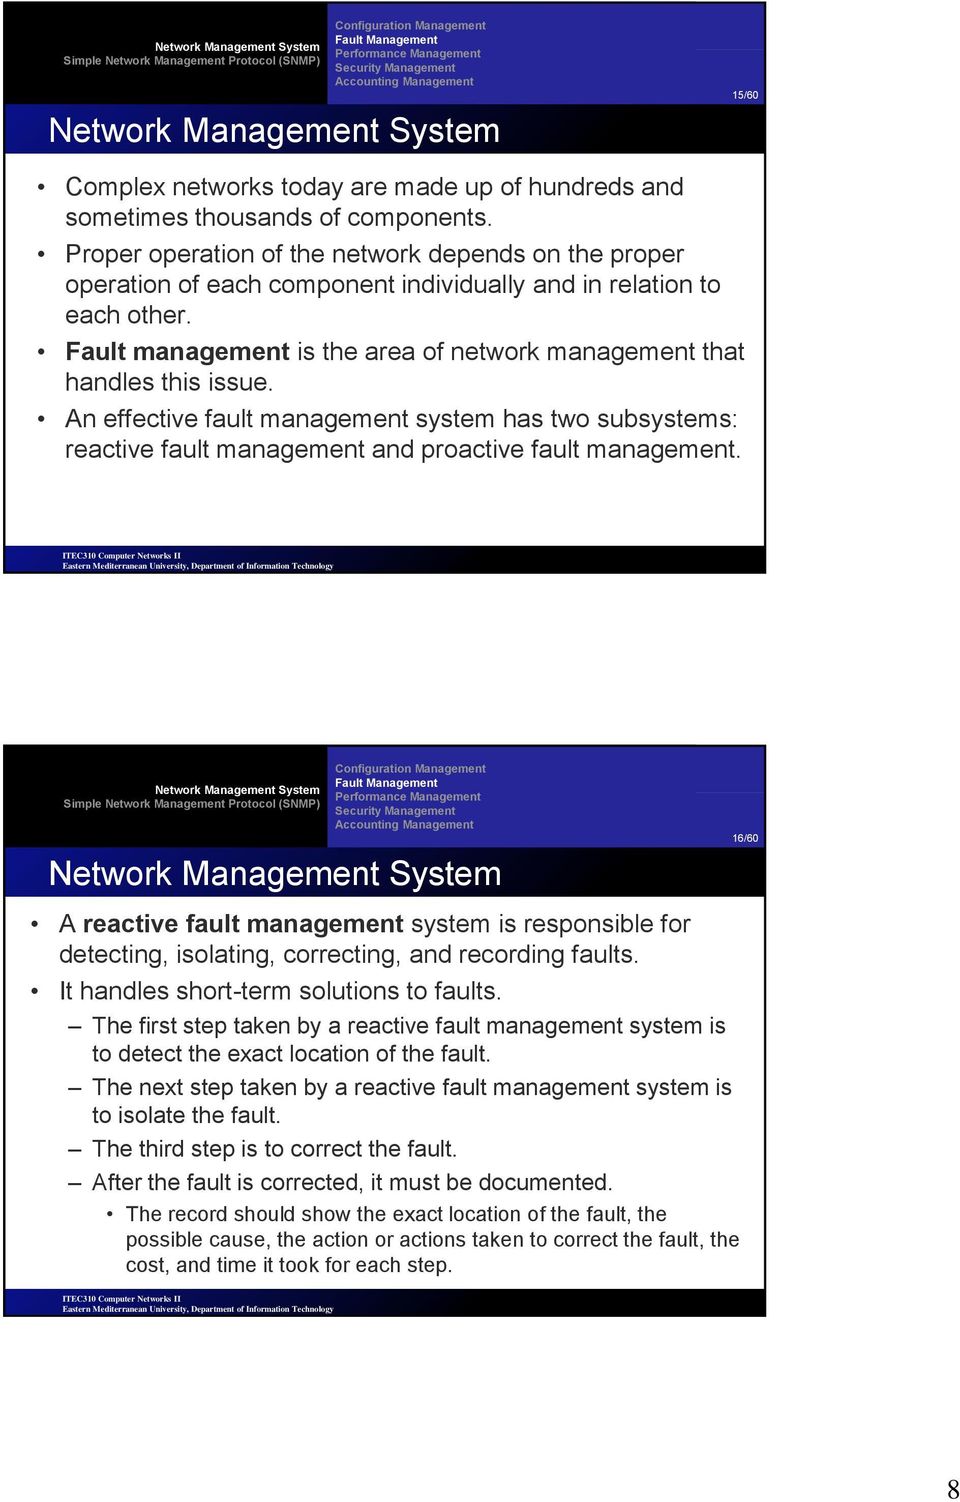 Fault management is the area of network management that handles this issue. An effective fault management system has two subsystems: reactive fault management and proactive fault management.